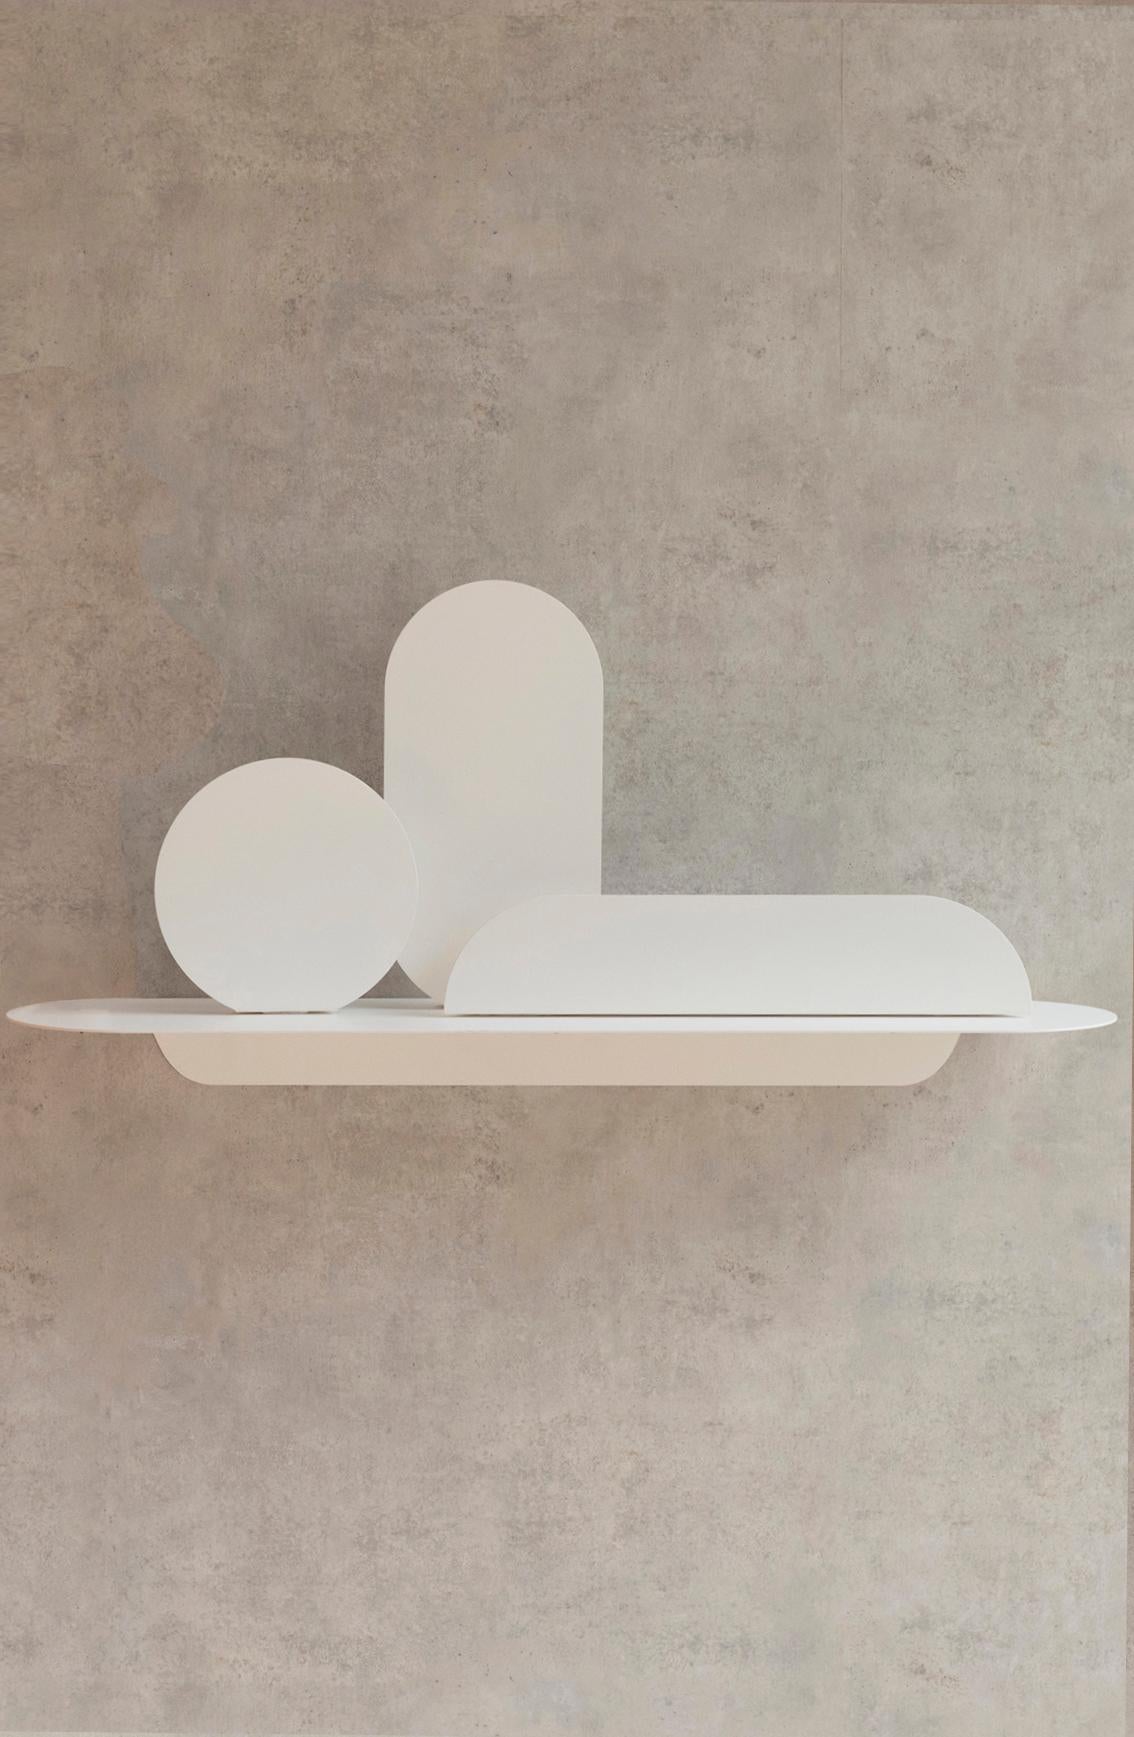 Simply White Shelf by Mademoiselle Jo
Dimensions: L 76 x W 24 cm.
Materials: Matte white steel.

Available in two versions and two colors. Please contact us.

Behind SIMPLY is actually a much more sophisticated object than its name suggests.
Made of